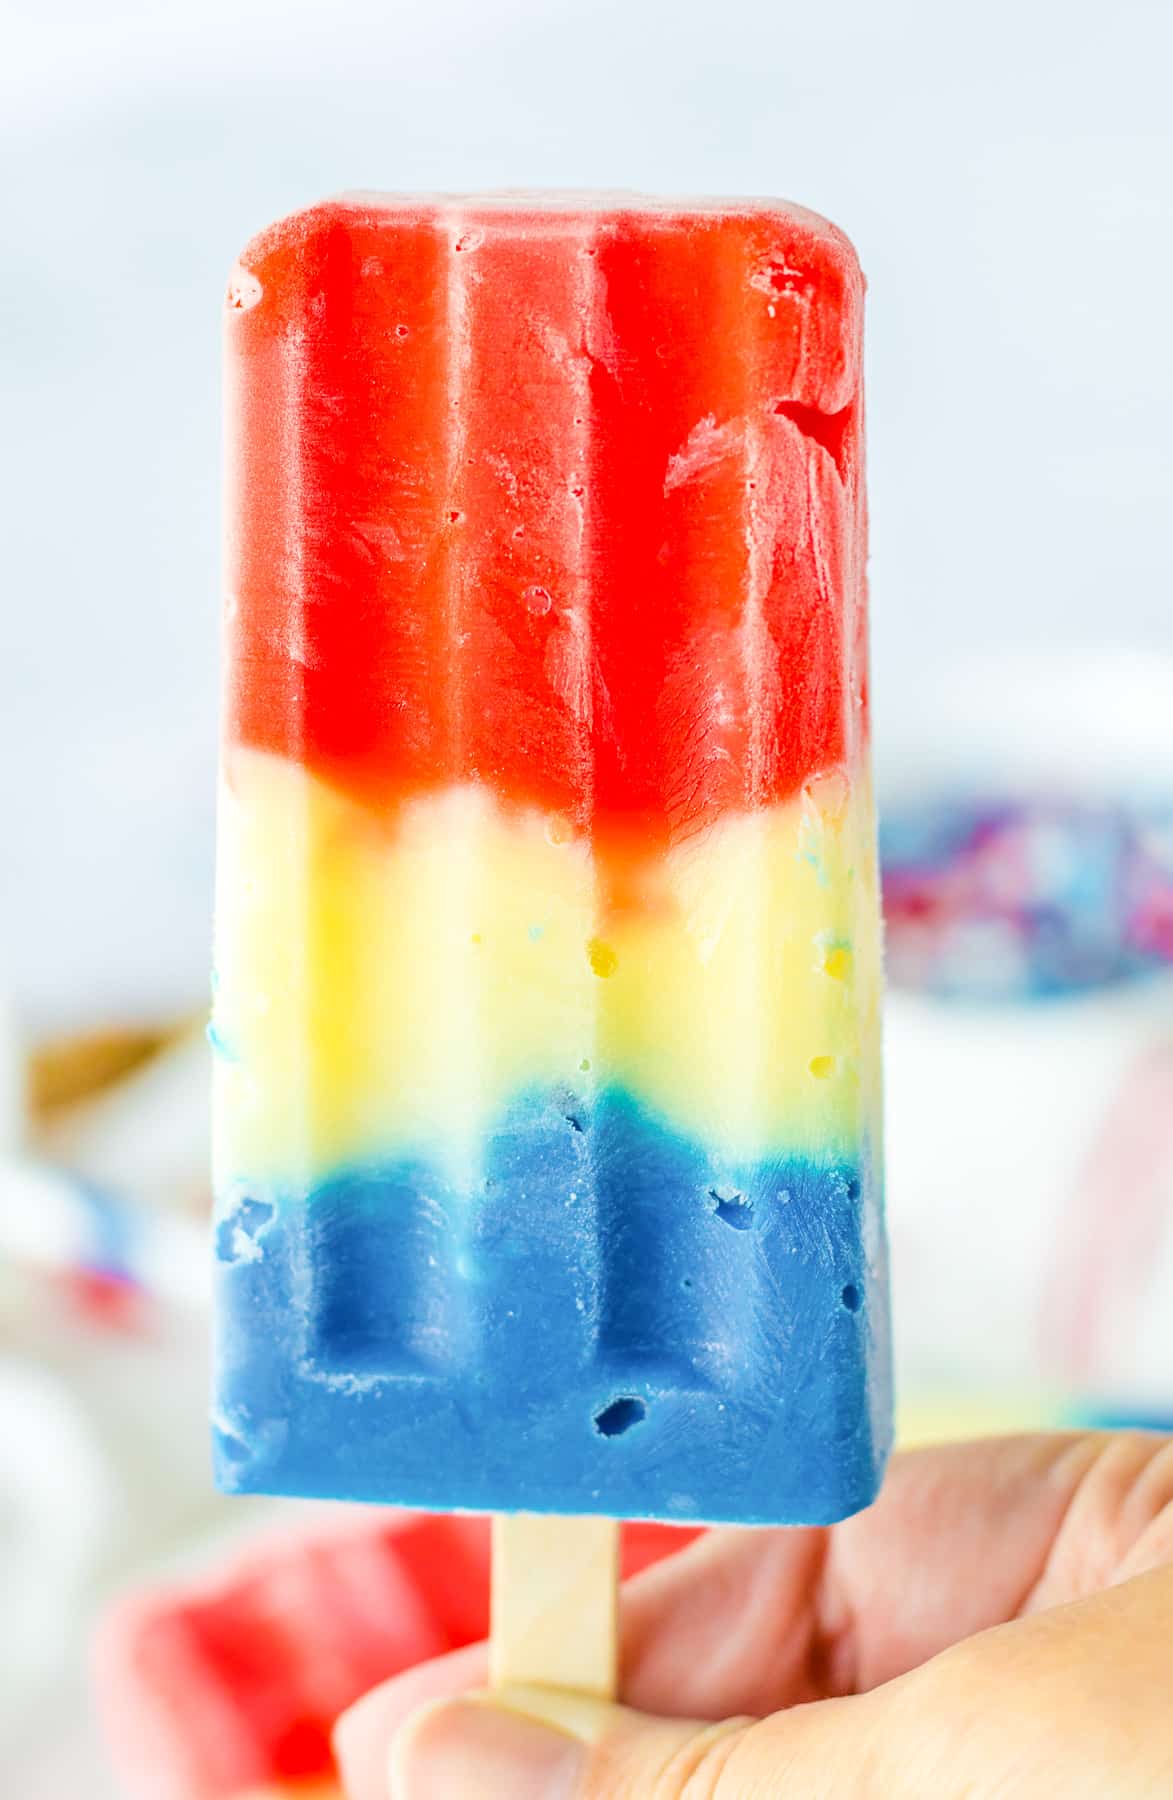 A red, white and blue popsicle being held up by a hand.